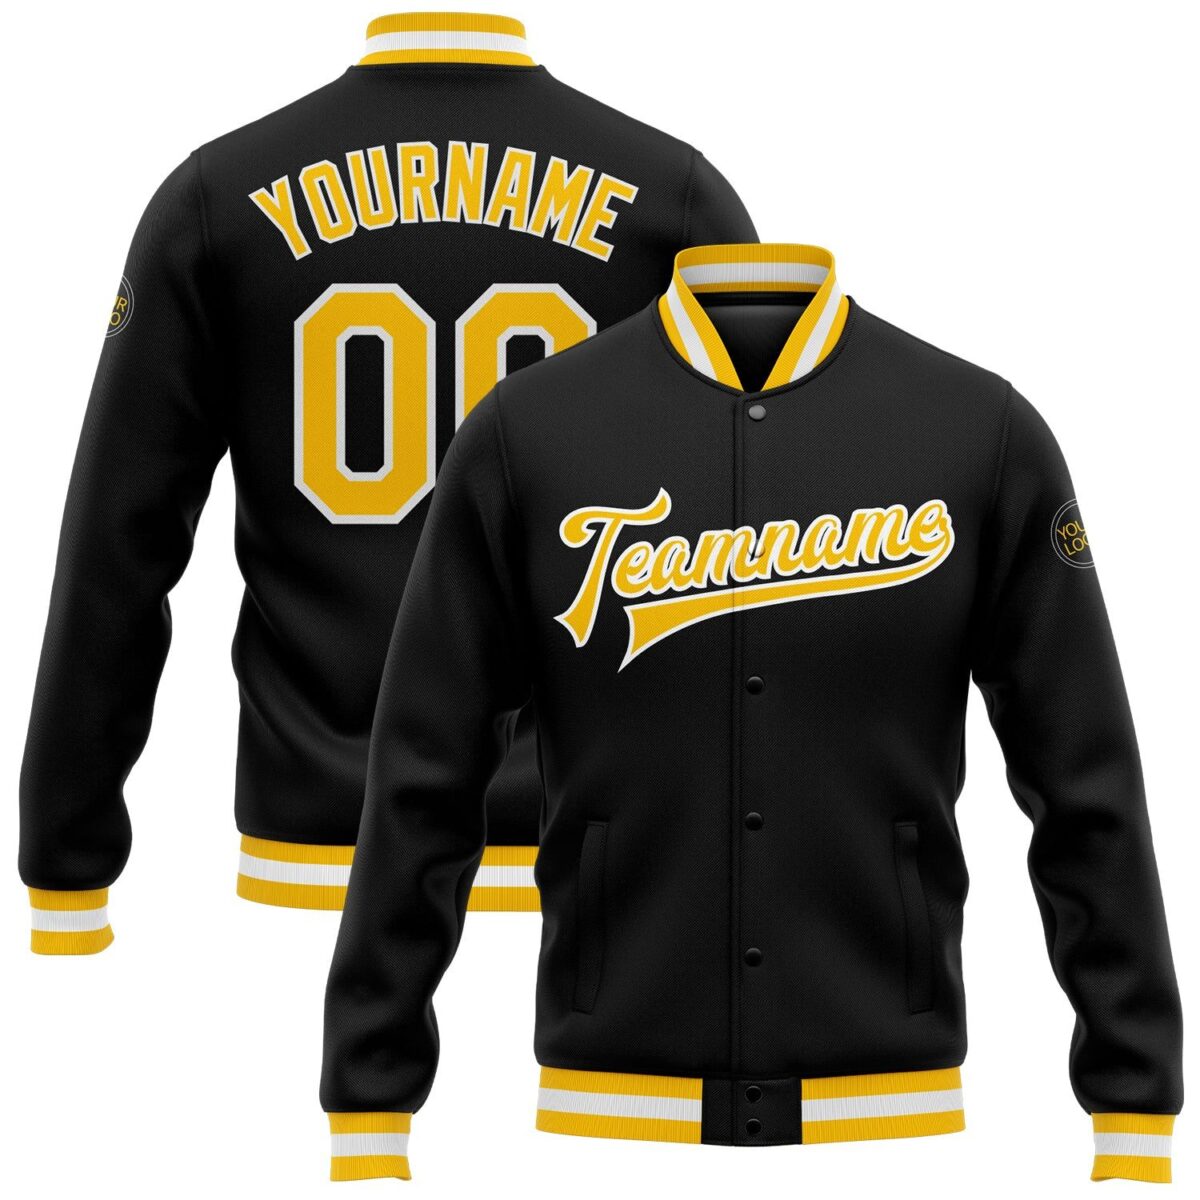 College Student Baseball Jackets with Black & Yellow 1